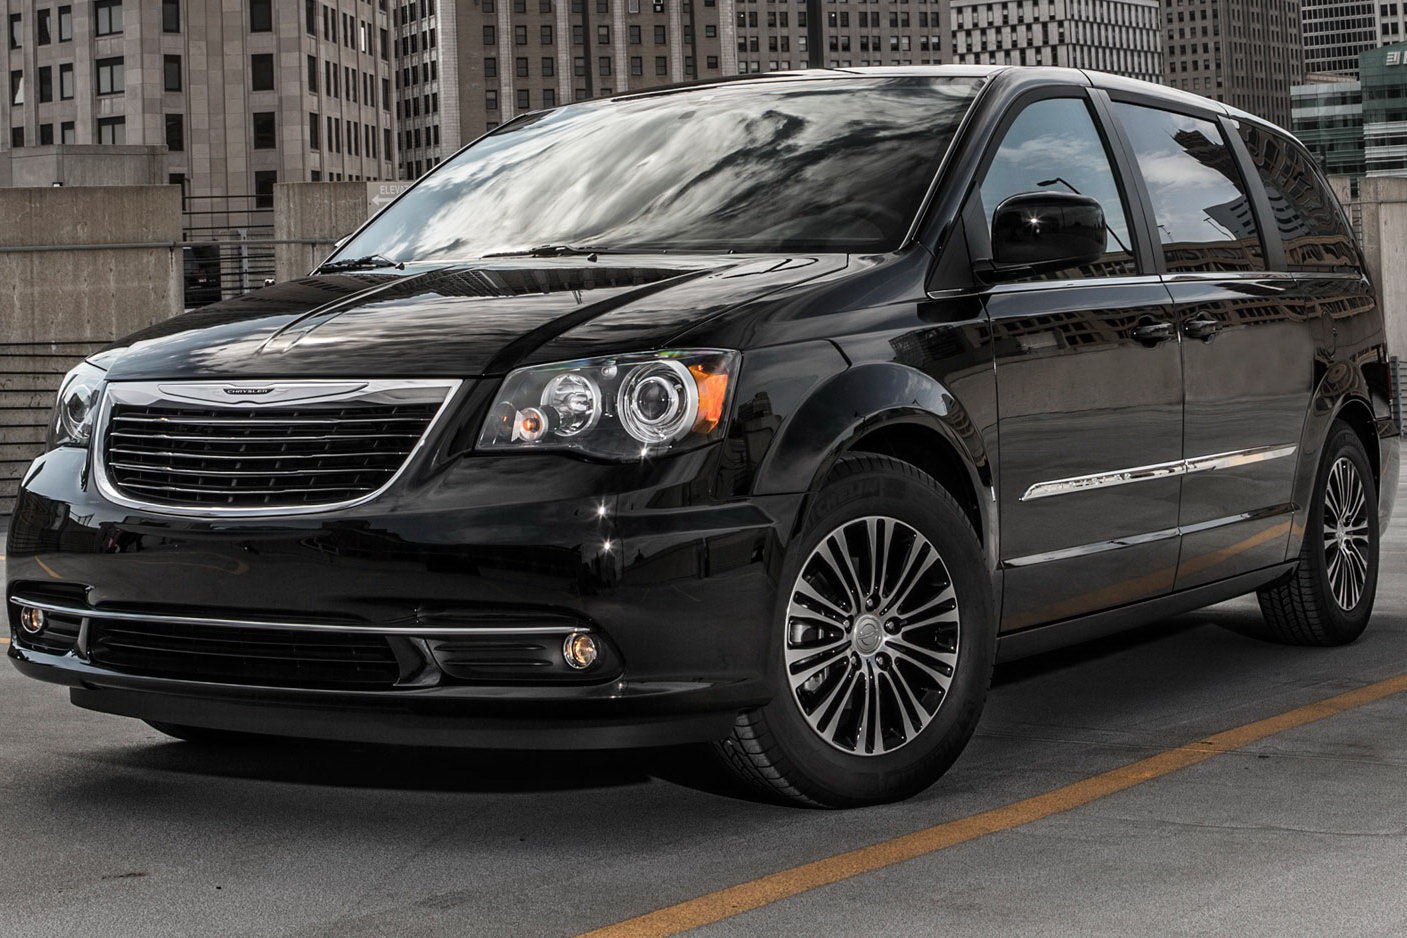 Chrysler town and country s model #4